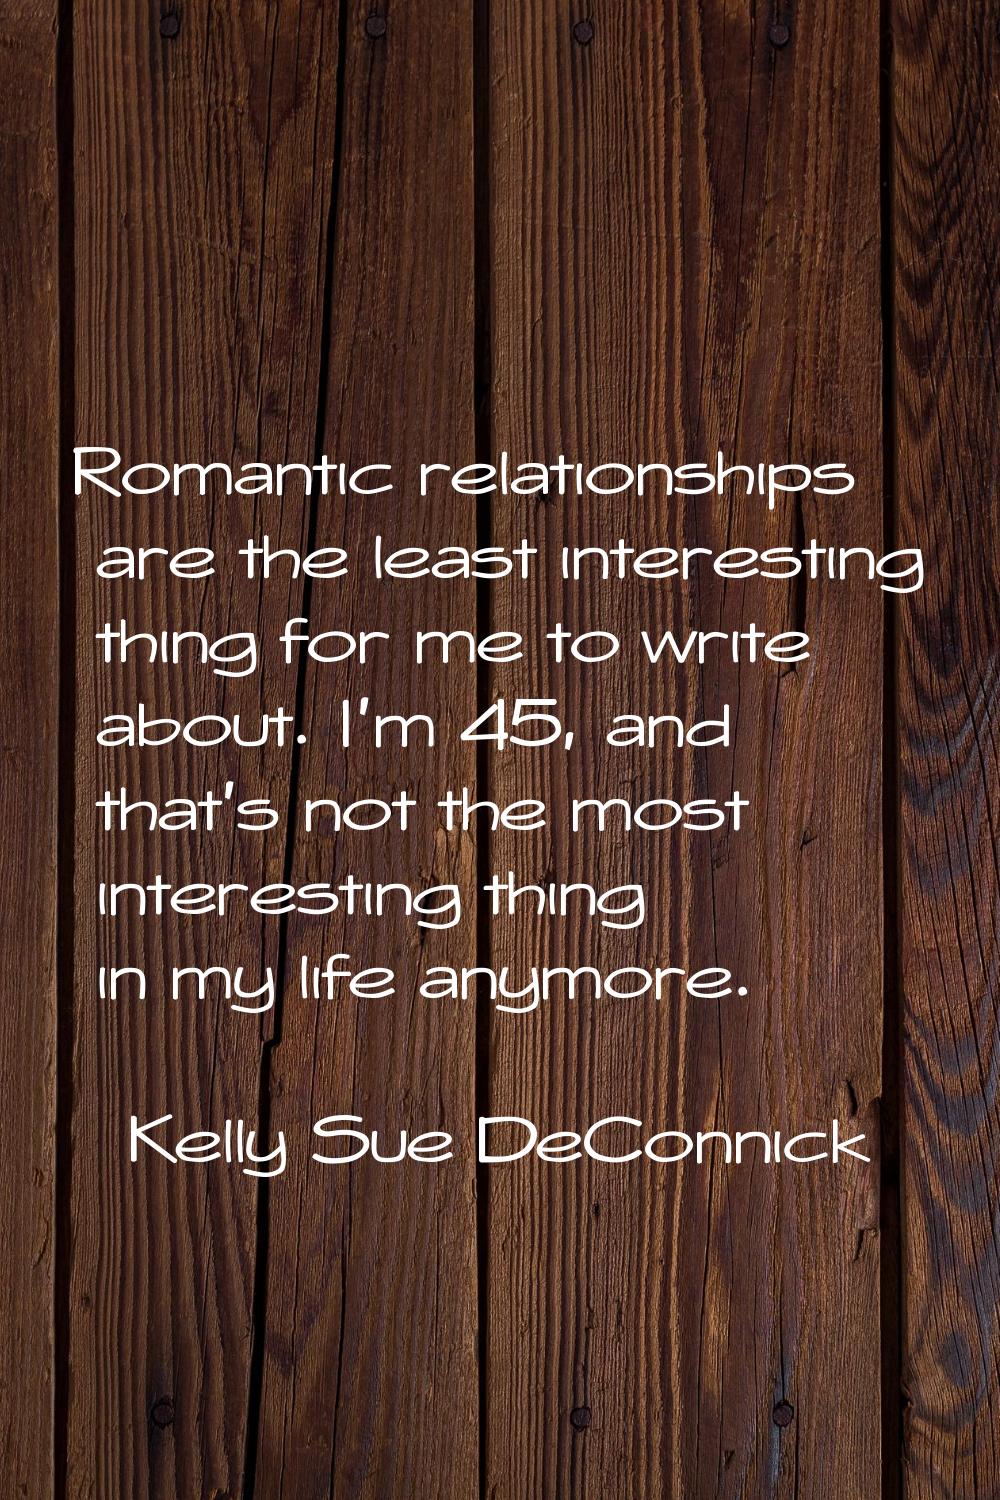 Romantic relationships are the least interesting thing for me to write about. I'm 45, and that's no